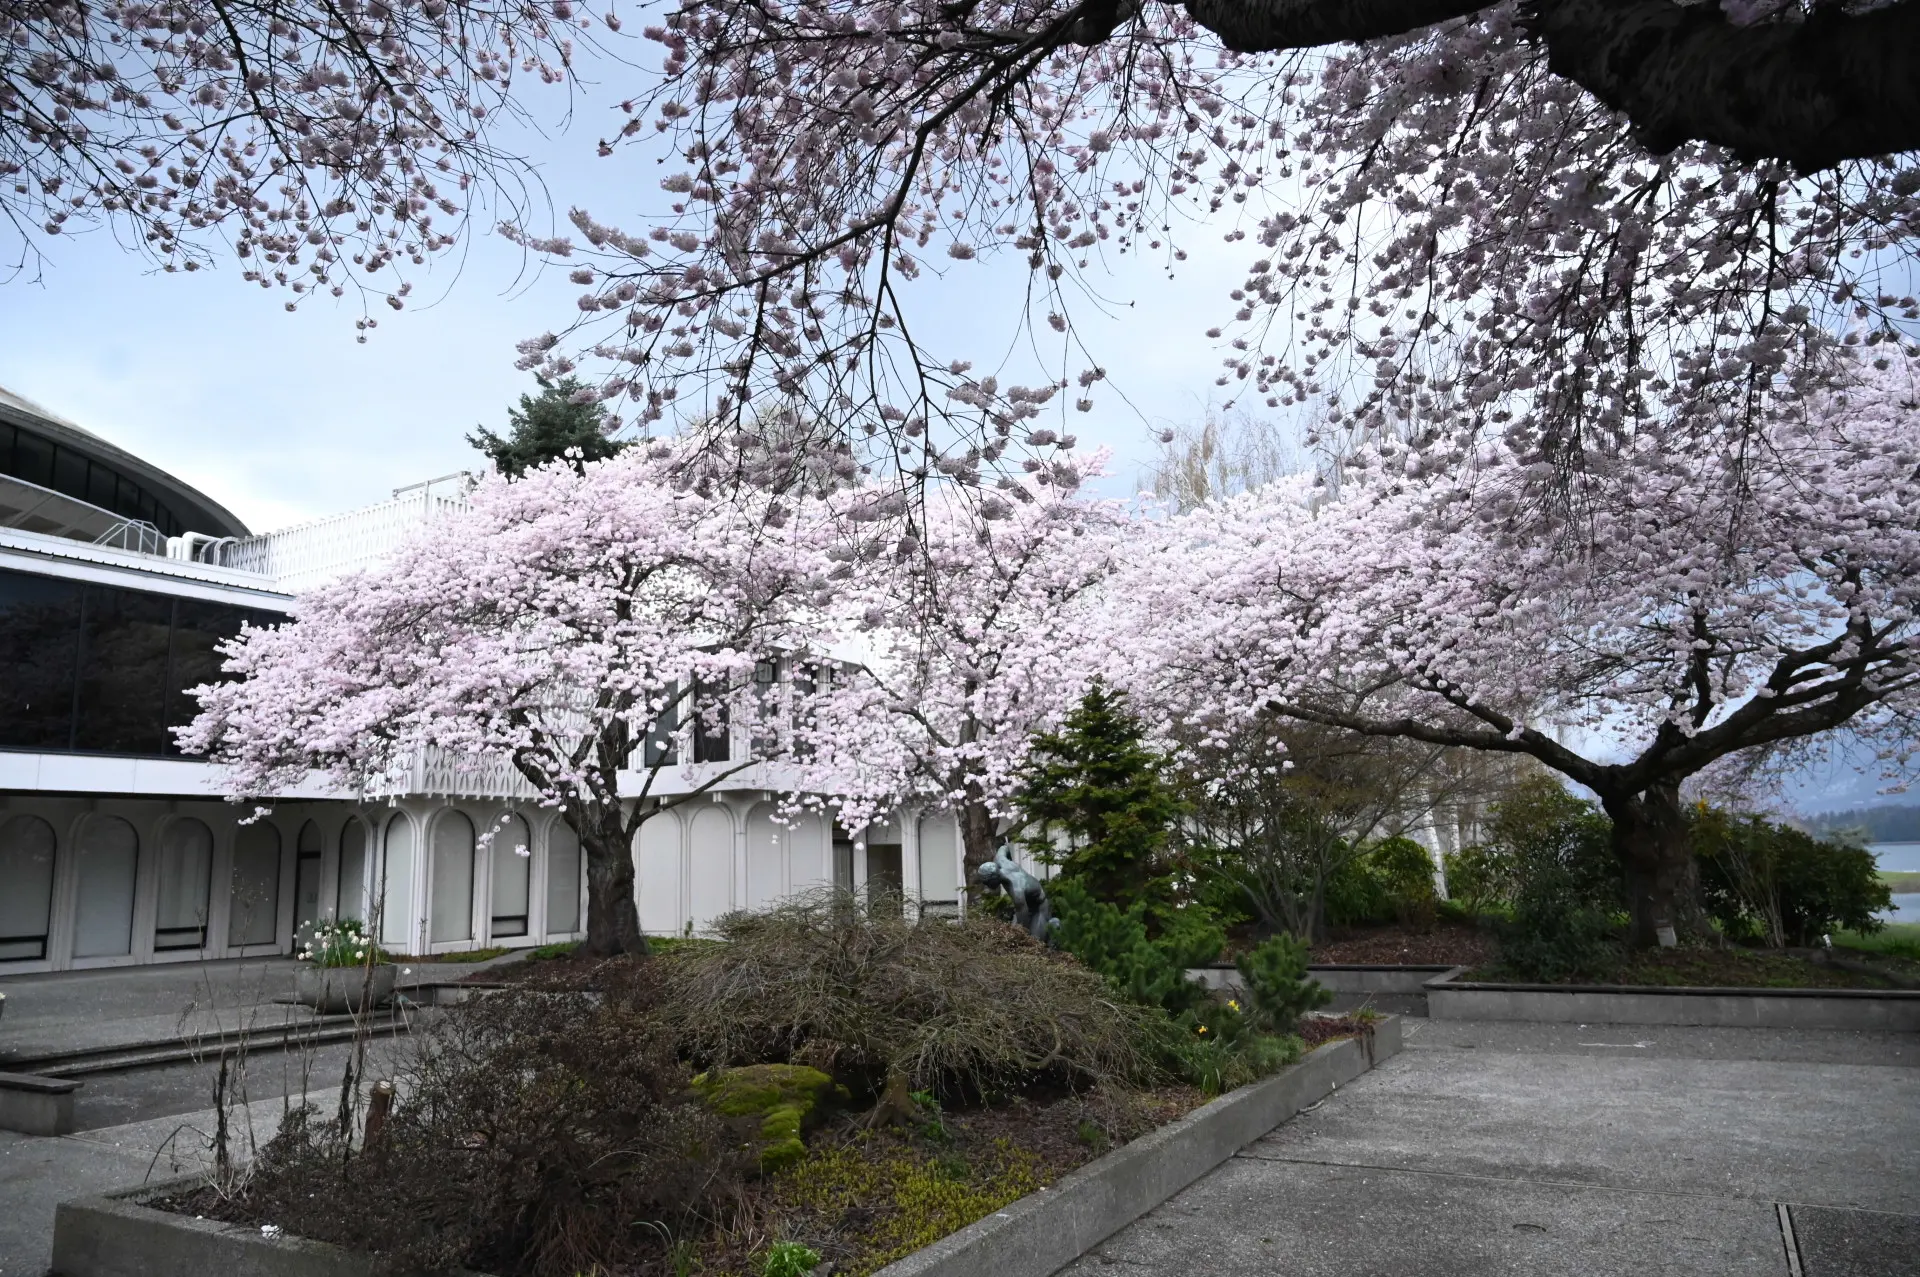 Catch Vancouver's picturesque cherry blossoms before they're gone